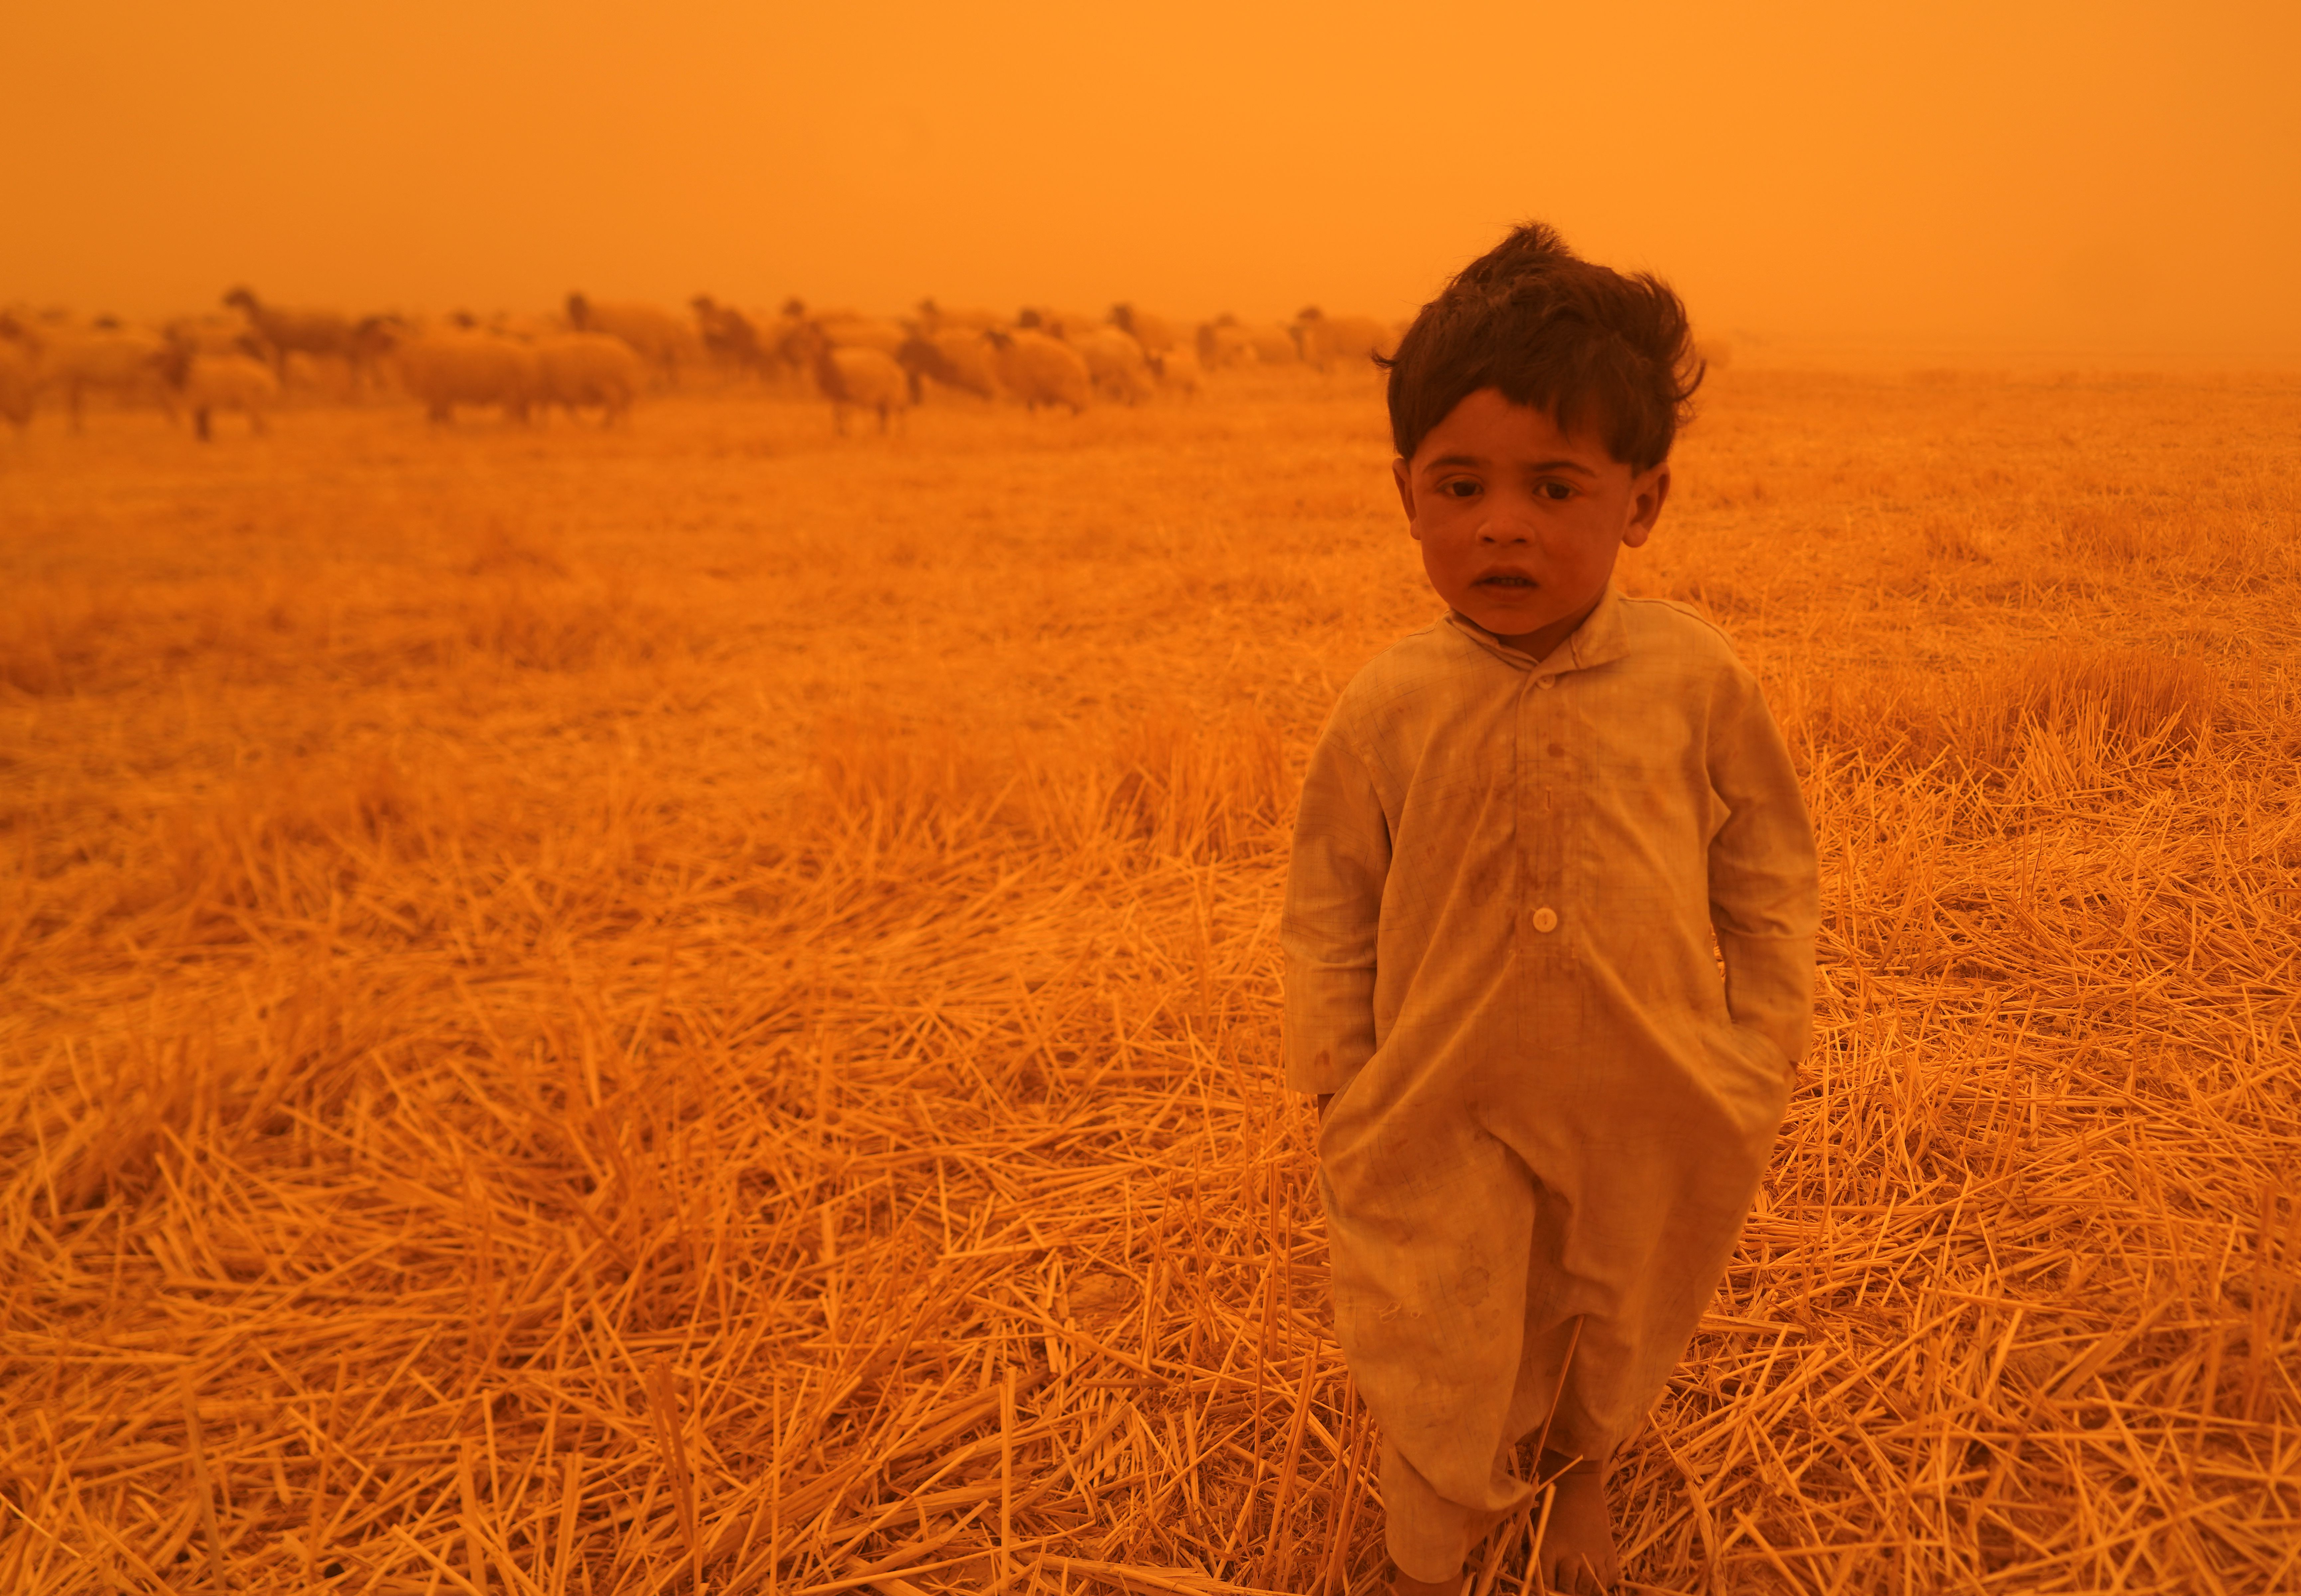 A child in a sandstorm.